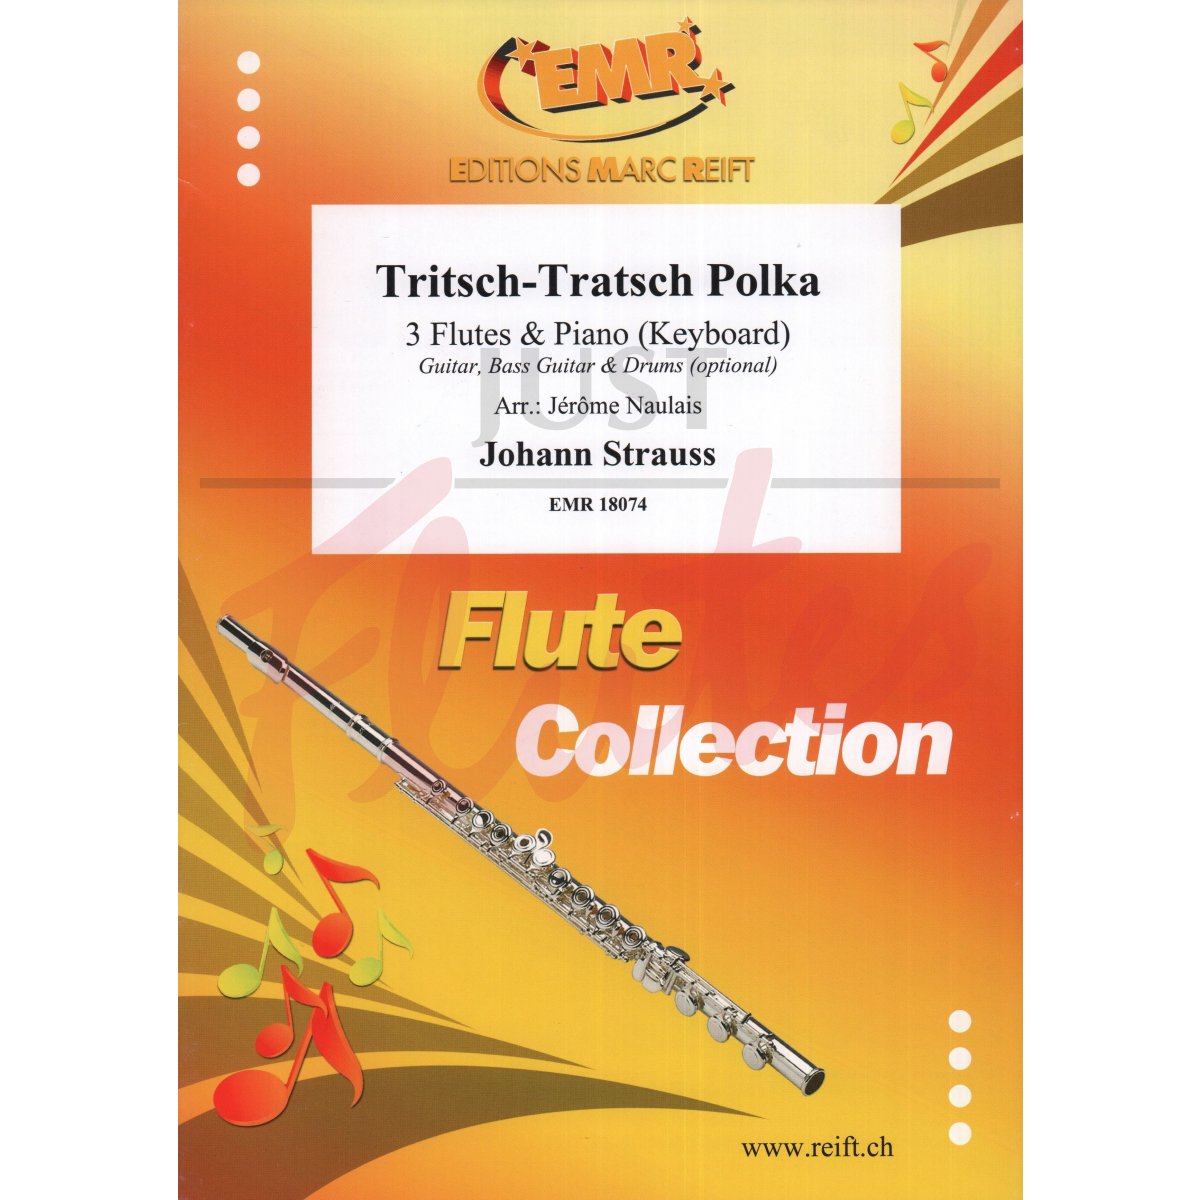 Tritsch-Tratsch Polka for Three Flutes and Piano